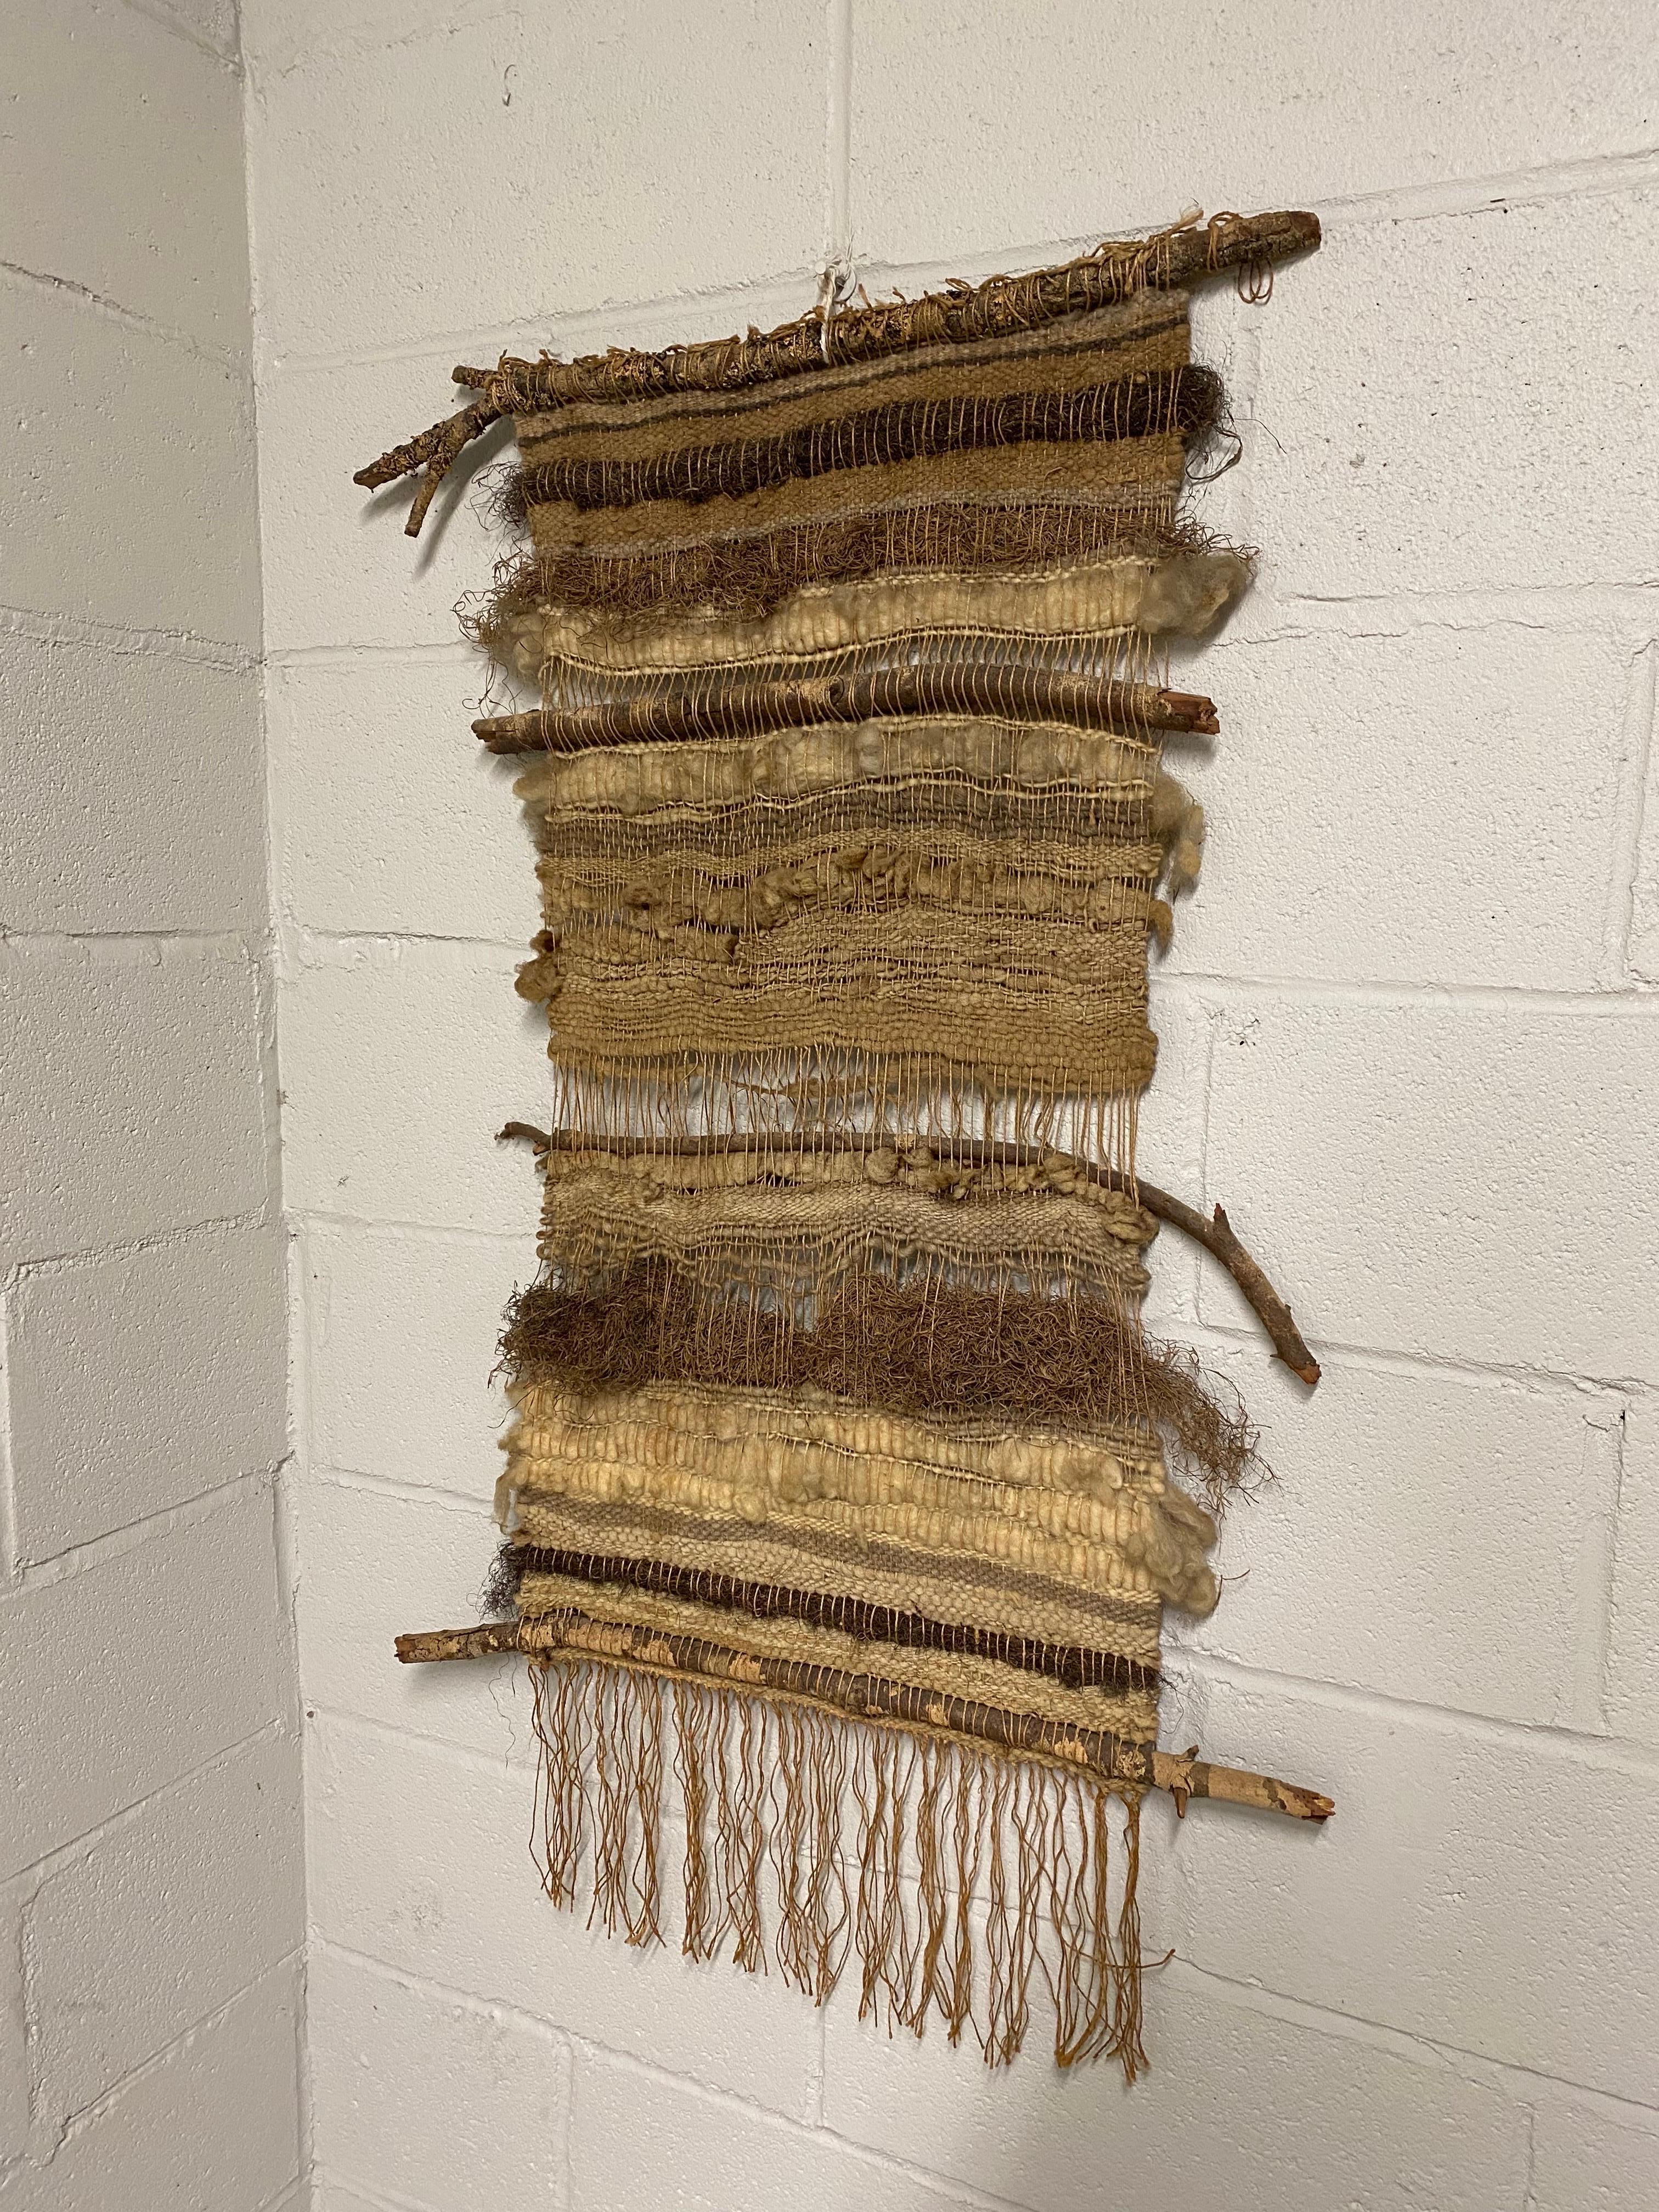 A fine fiber art wall hanging made of wool, cotton, wood and natural fibers. Organic Modern crafts at its finest. Made at the height of hand crafted decorative wares in the late 1960s and early 1970s. This piece was made by a local Woodstock artisan